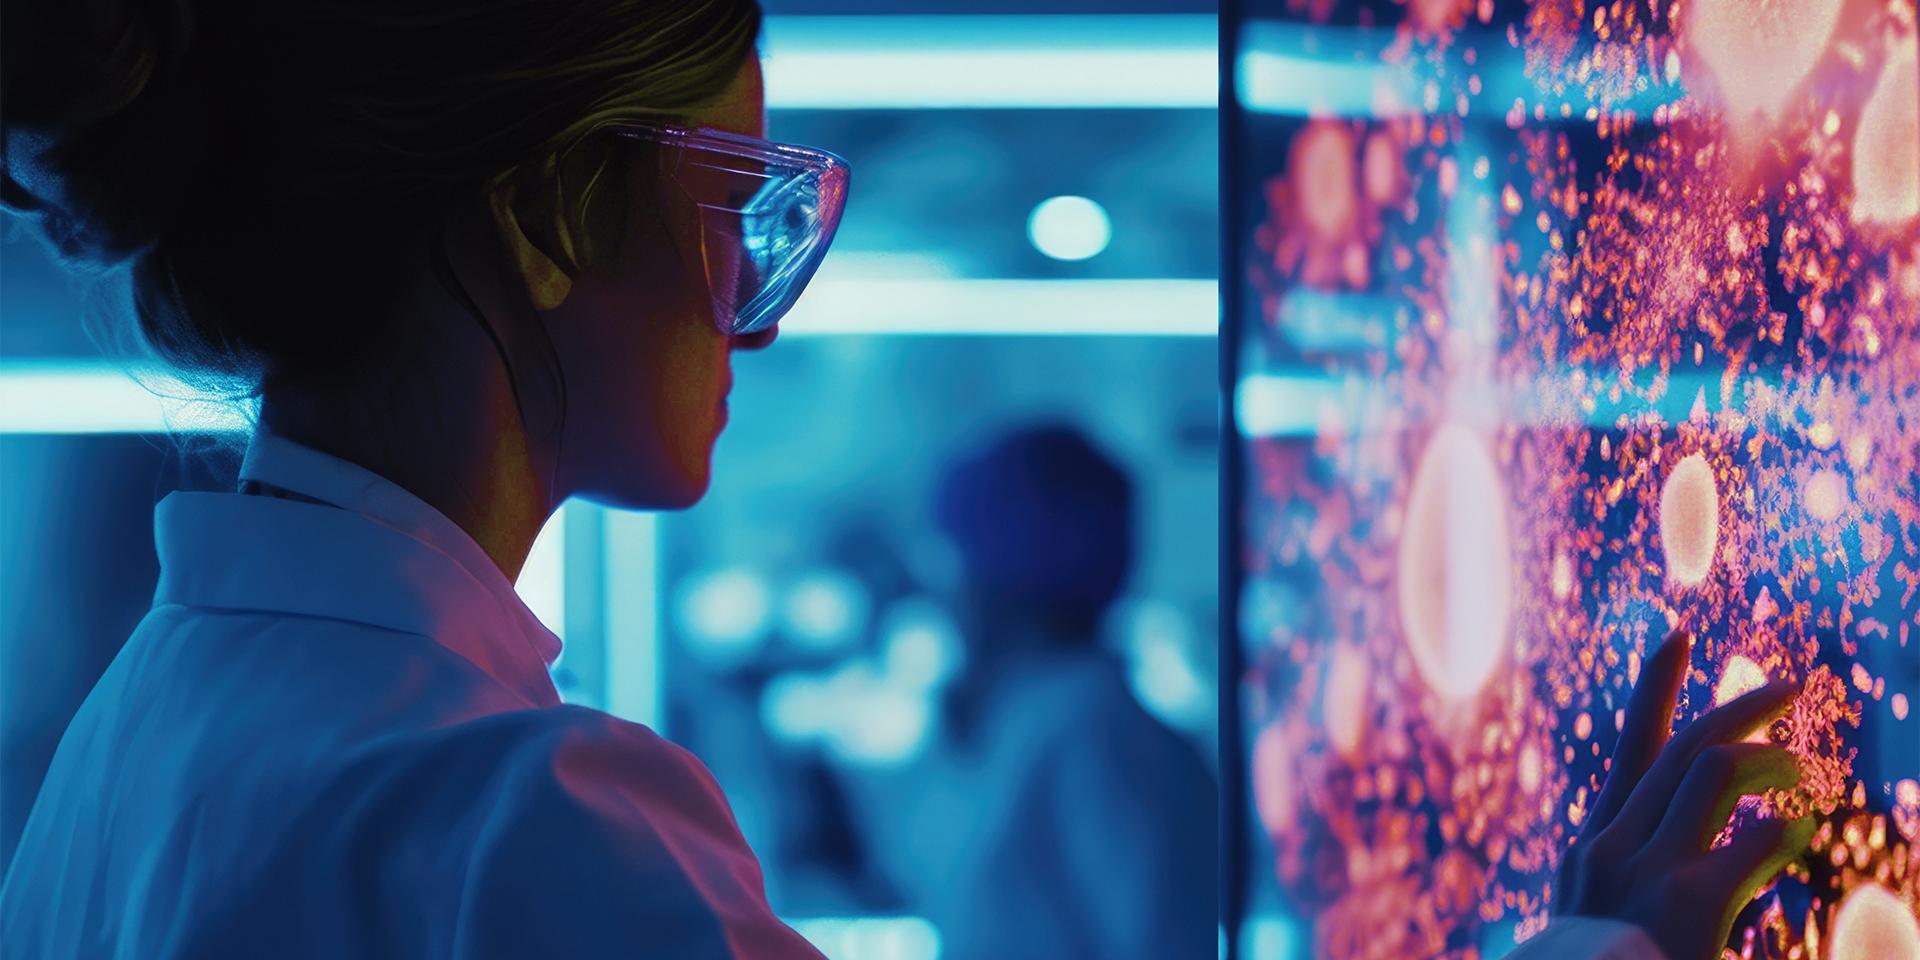 Woman with safety glasses and white gown, being in dimly glowing blue laboratory, touching screen with her hand that shows what looks like cells, lighting up in bright red and orange